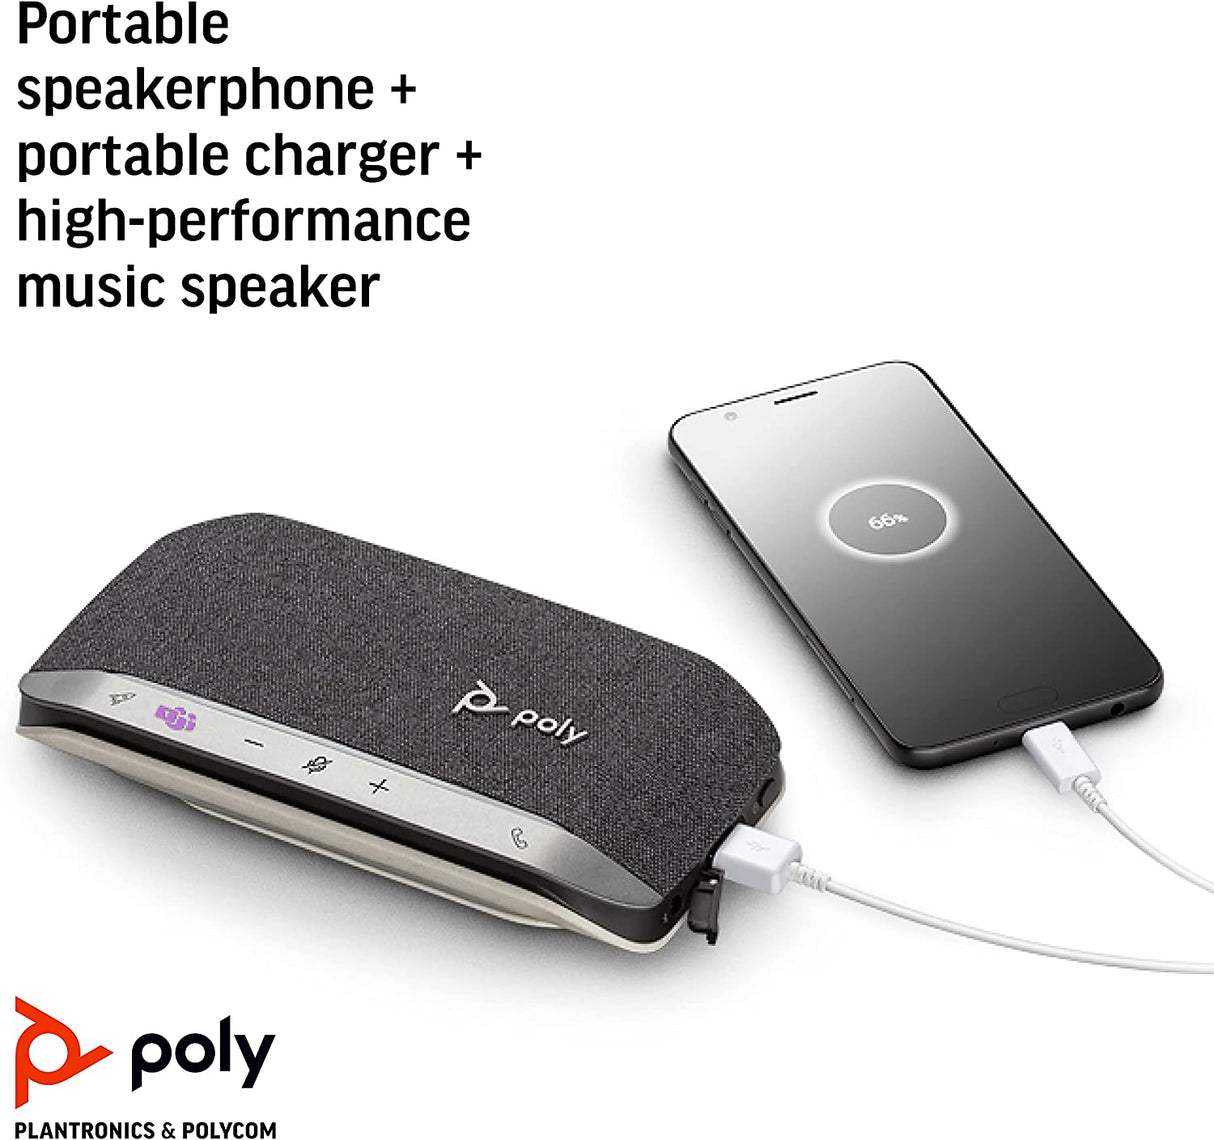 Poly Sync 20 USB-A Smart Speakerphone (Plantronics) - Personal Portable Speakerphone - Noise &amp; Echo Reduction - Connect to Cell Phone via Bluetooth and PC/Mac via USB-A Cable - Teams Certified USB-A Teams Version Black